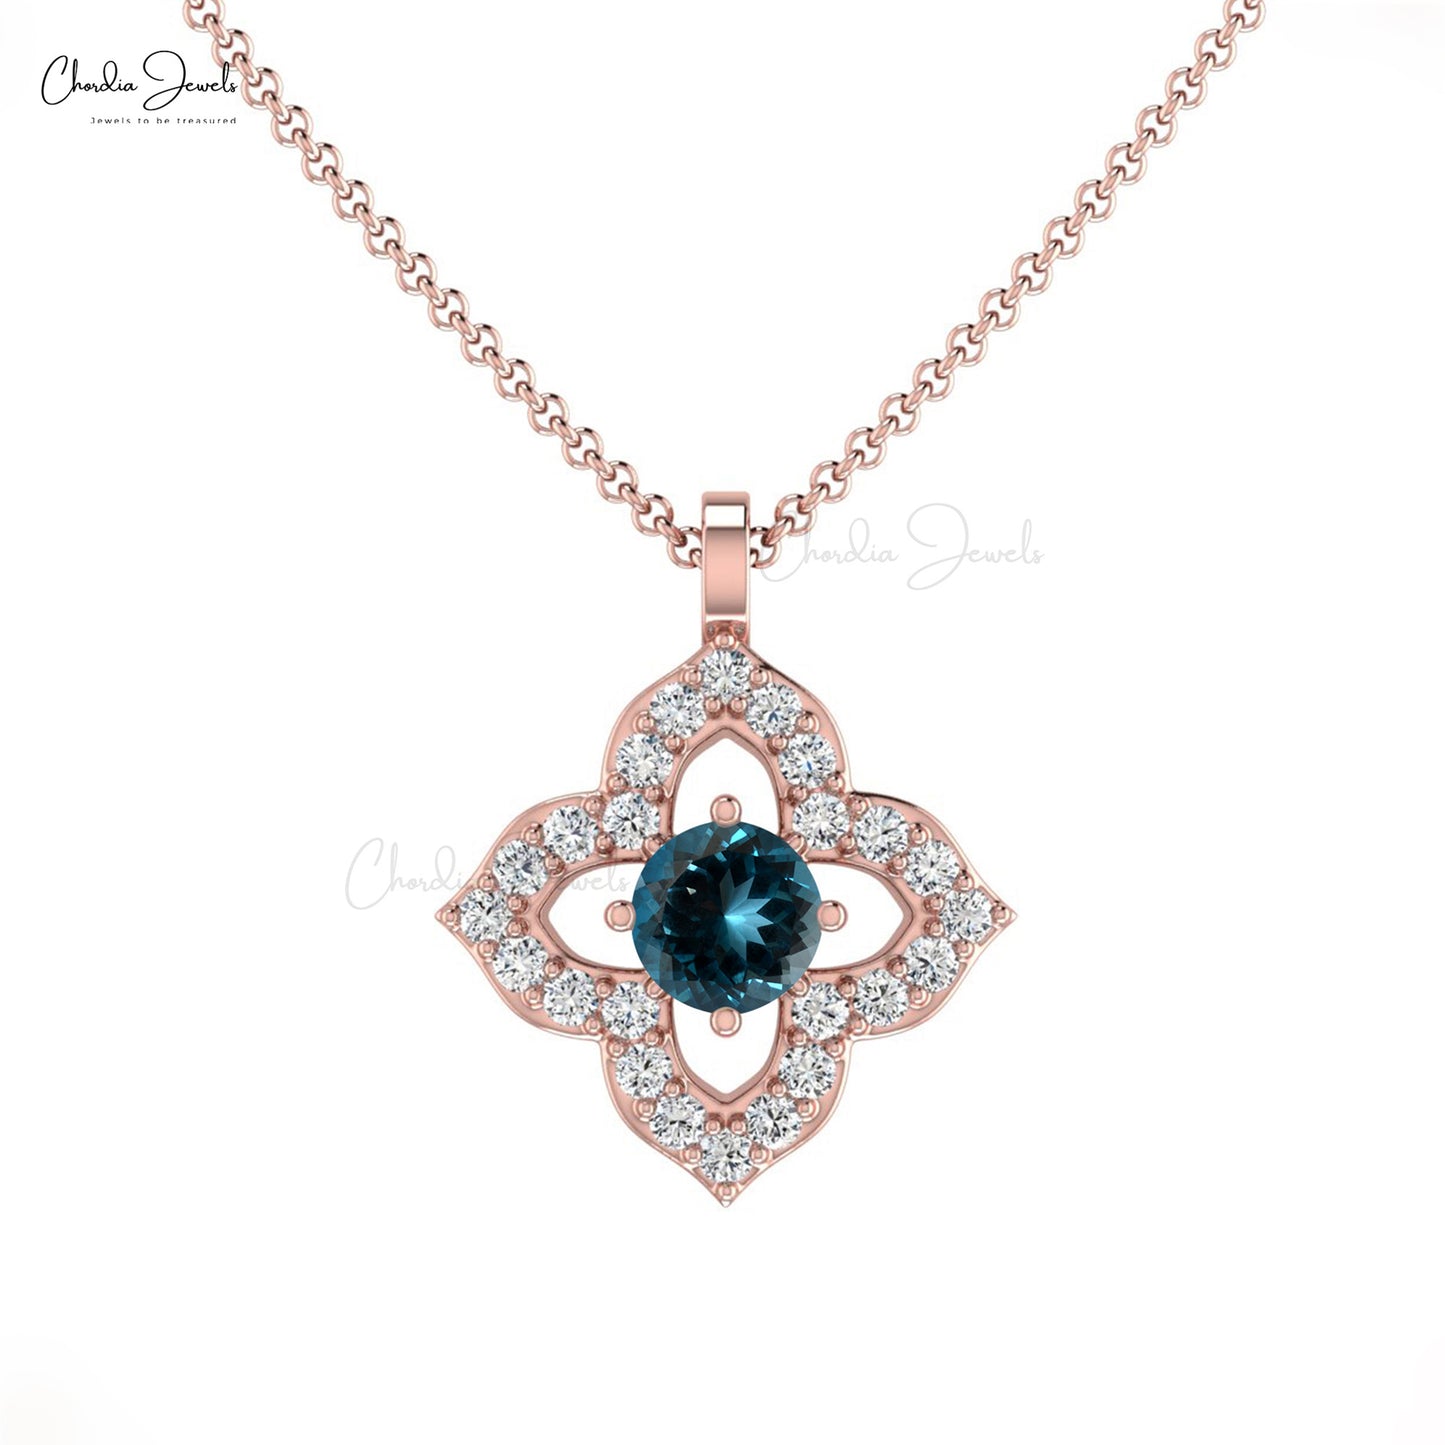 Latest Design Floral Charm Pendant Authentic London Blue Topaz and White Diamond Pendant Necklace 14k Real Gold Hallmarked Jewelry For Gift